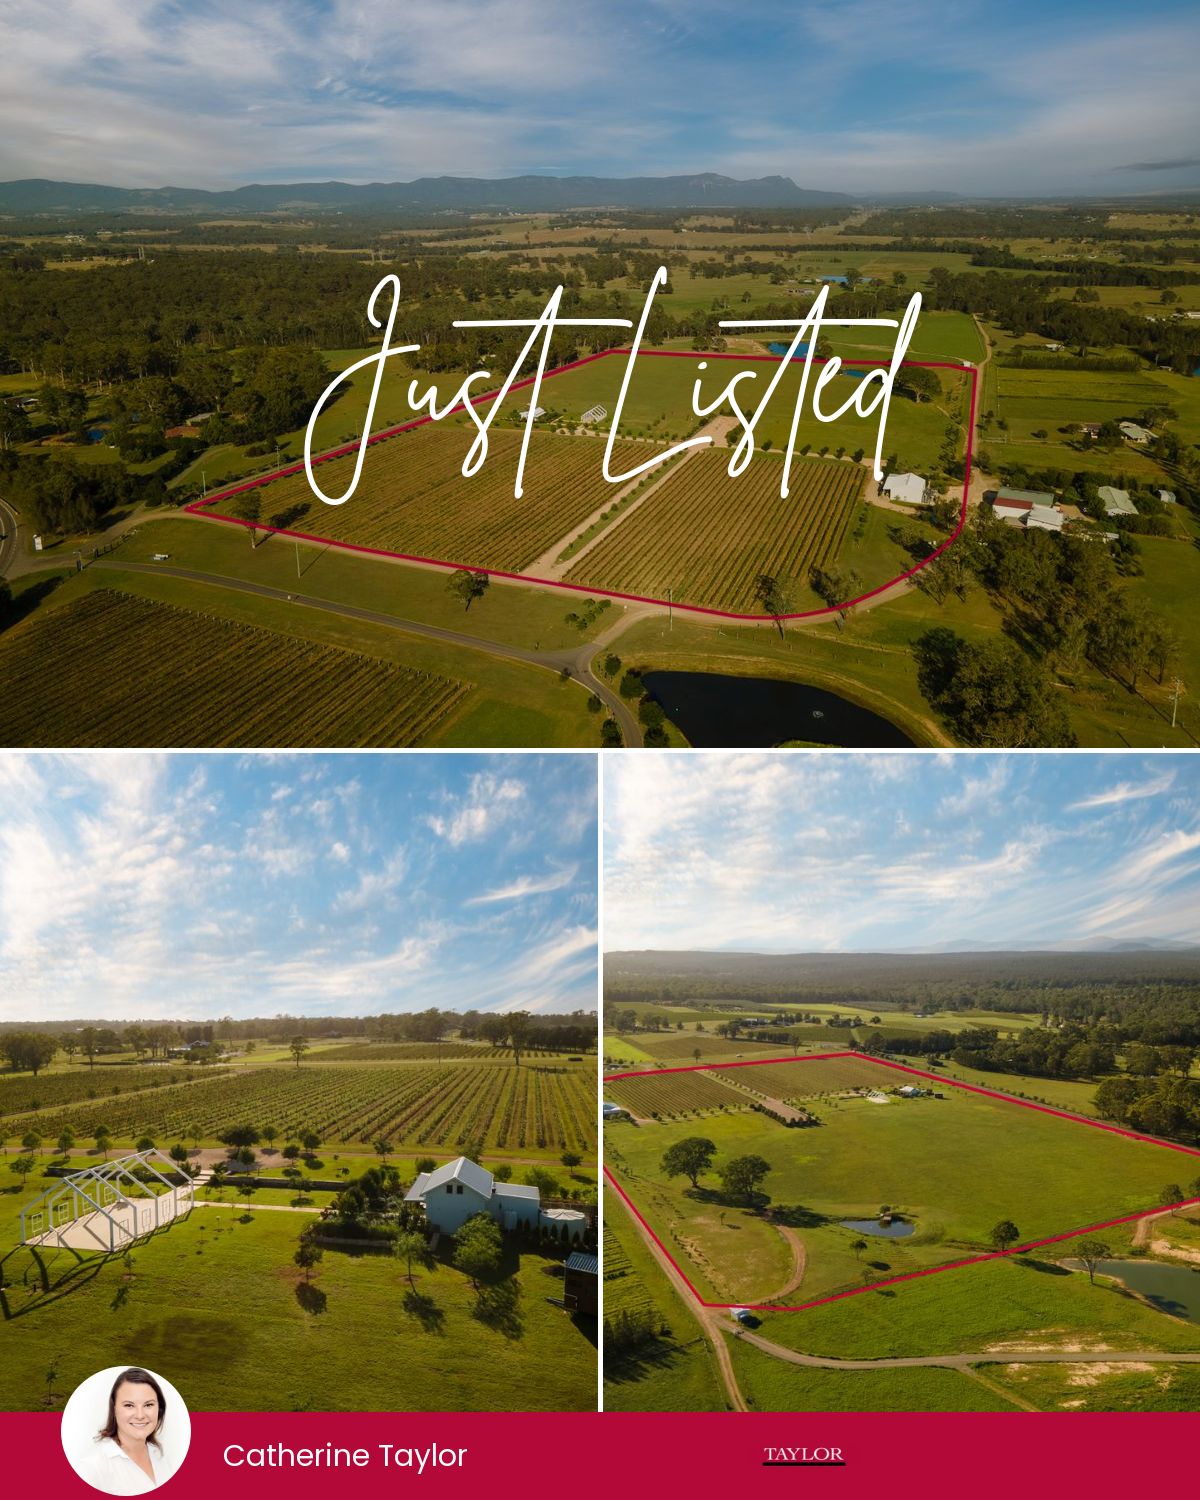 469 Lovedale Rd, Lovedale, NSW 2325 | Realty.com.au